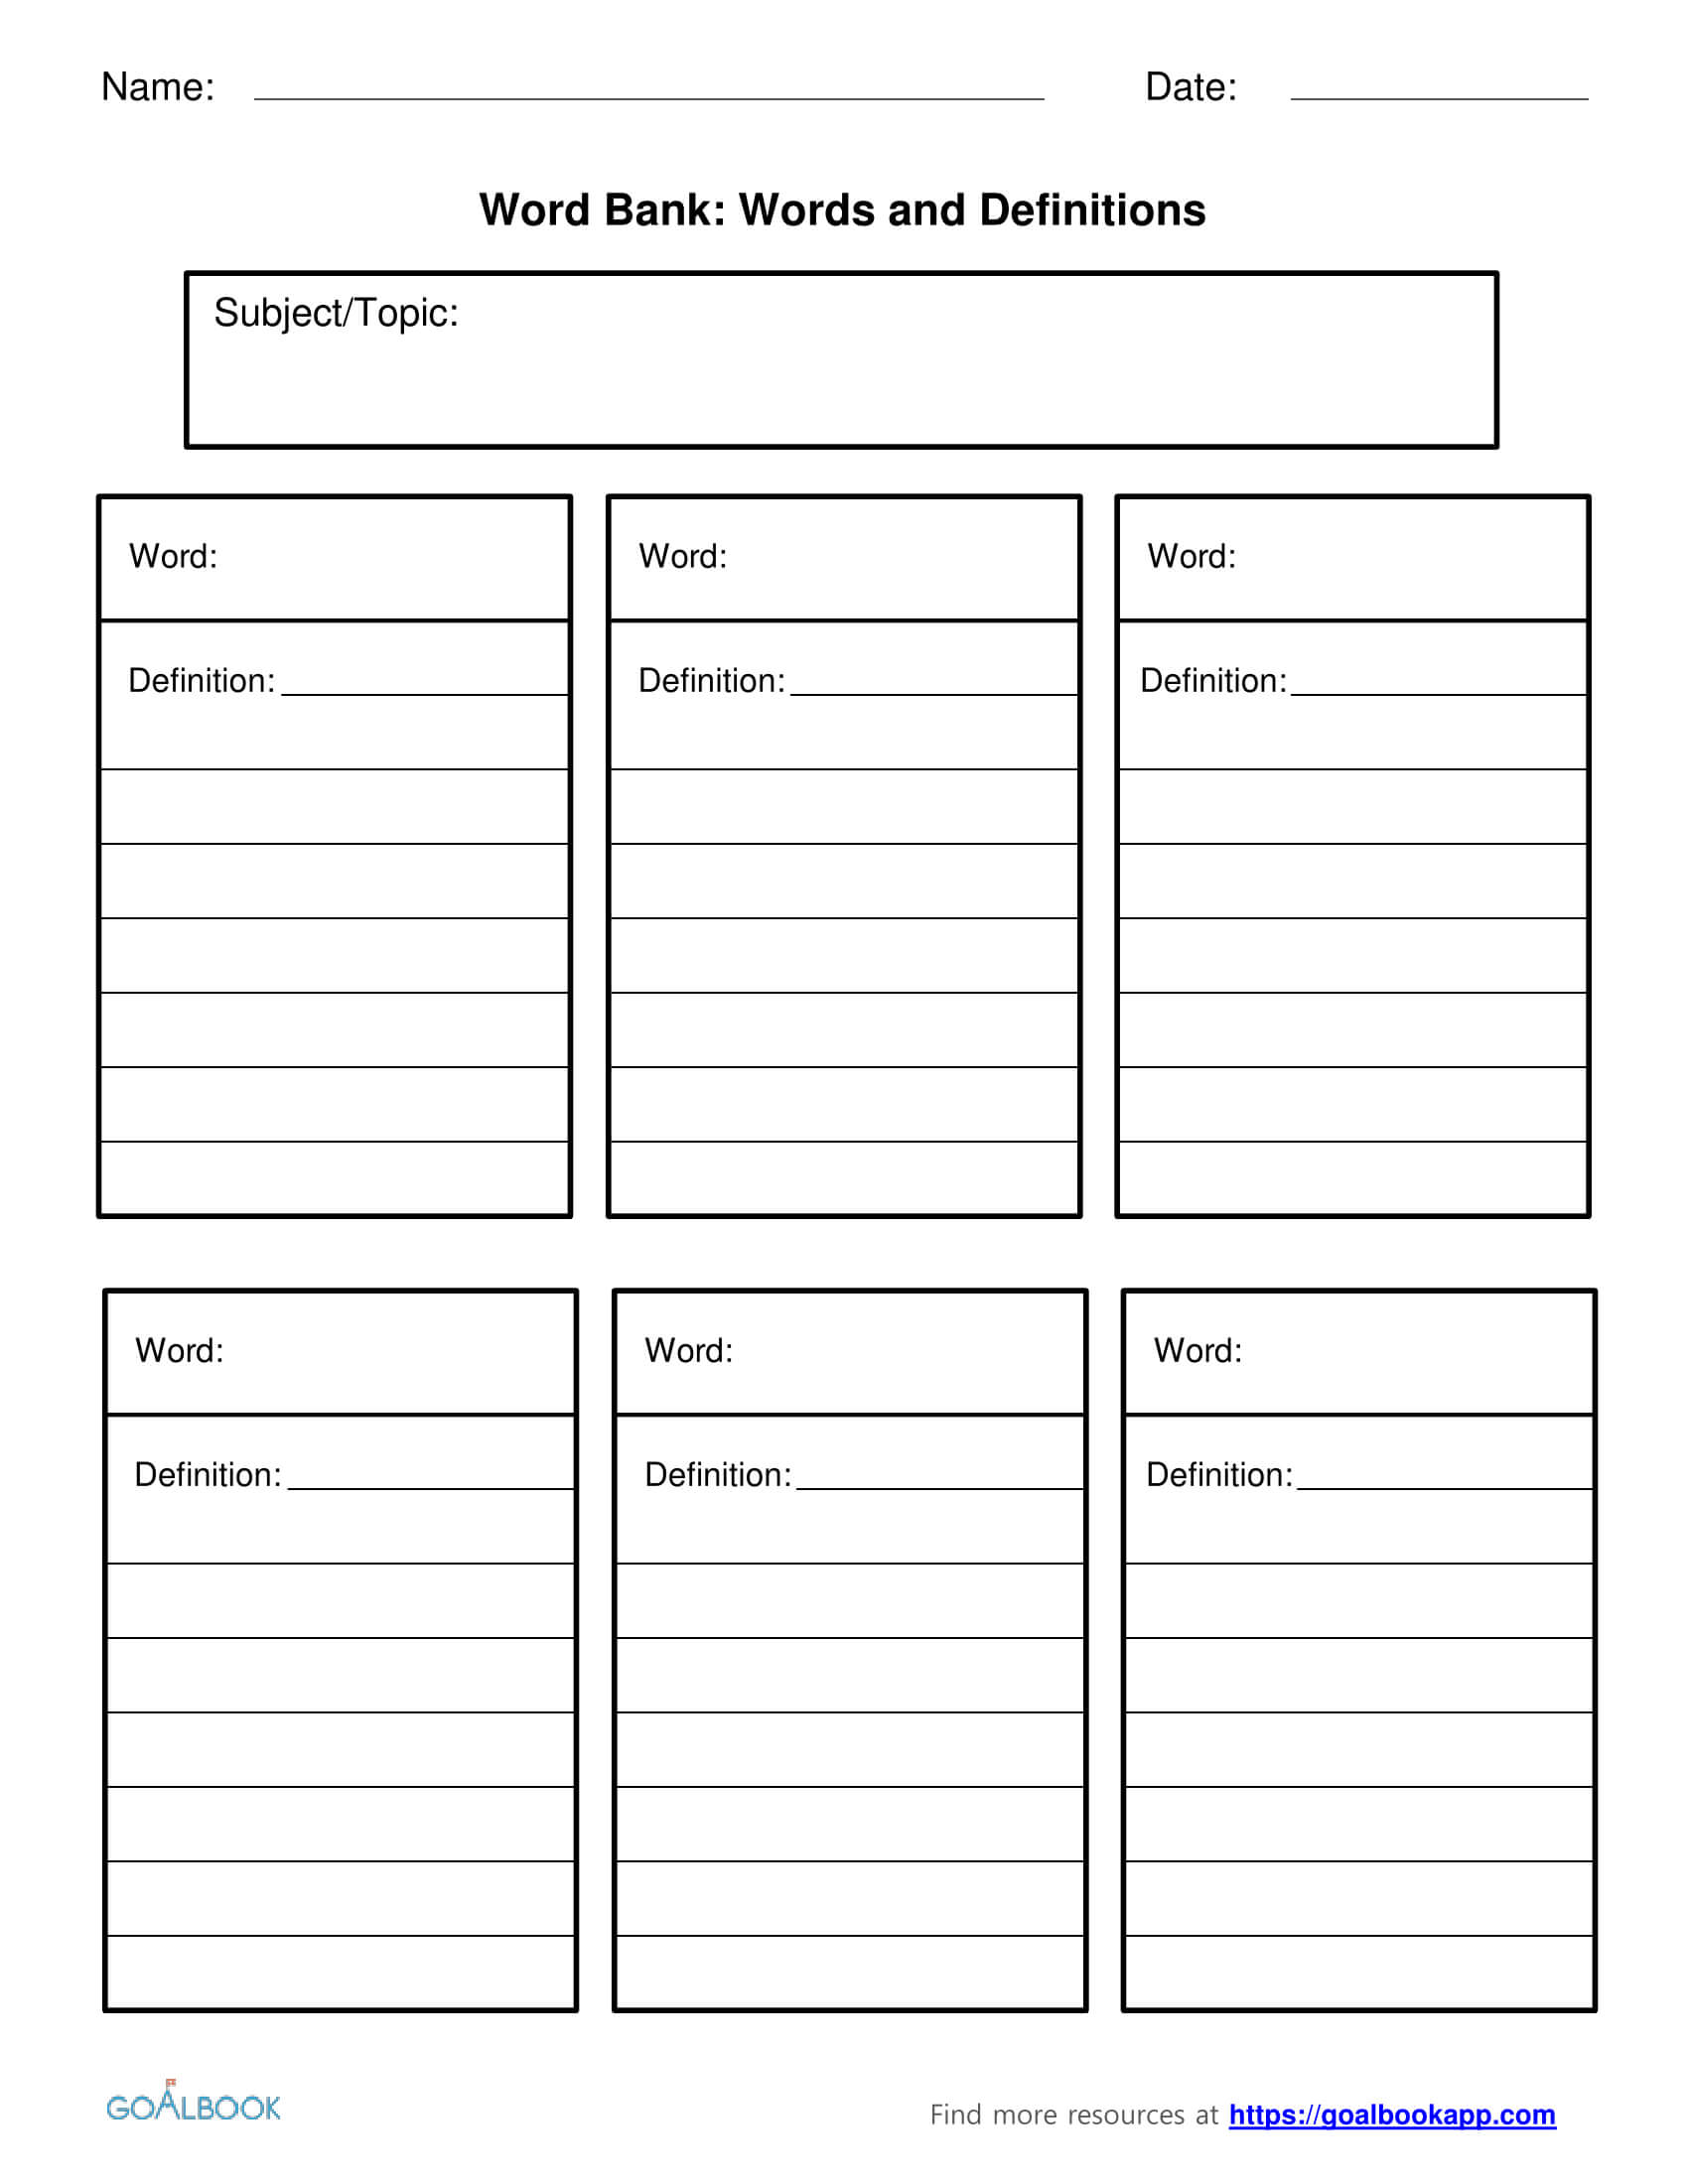 Word Bank | Udl Strategies – Goalbook Toolkit Within Personal Word Wall Template